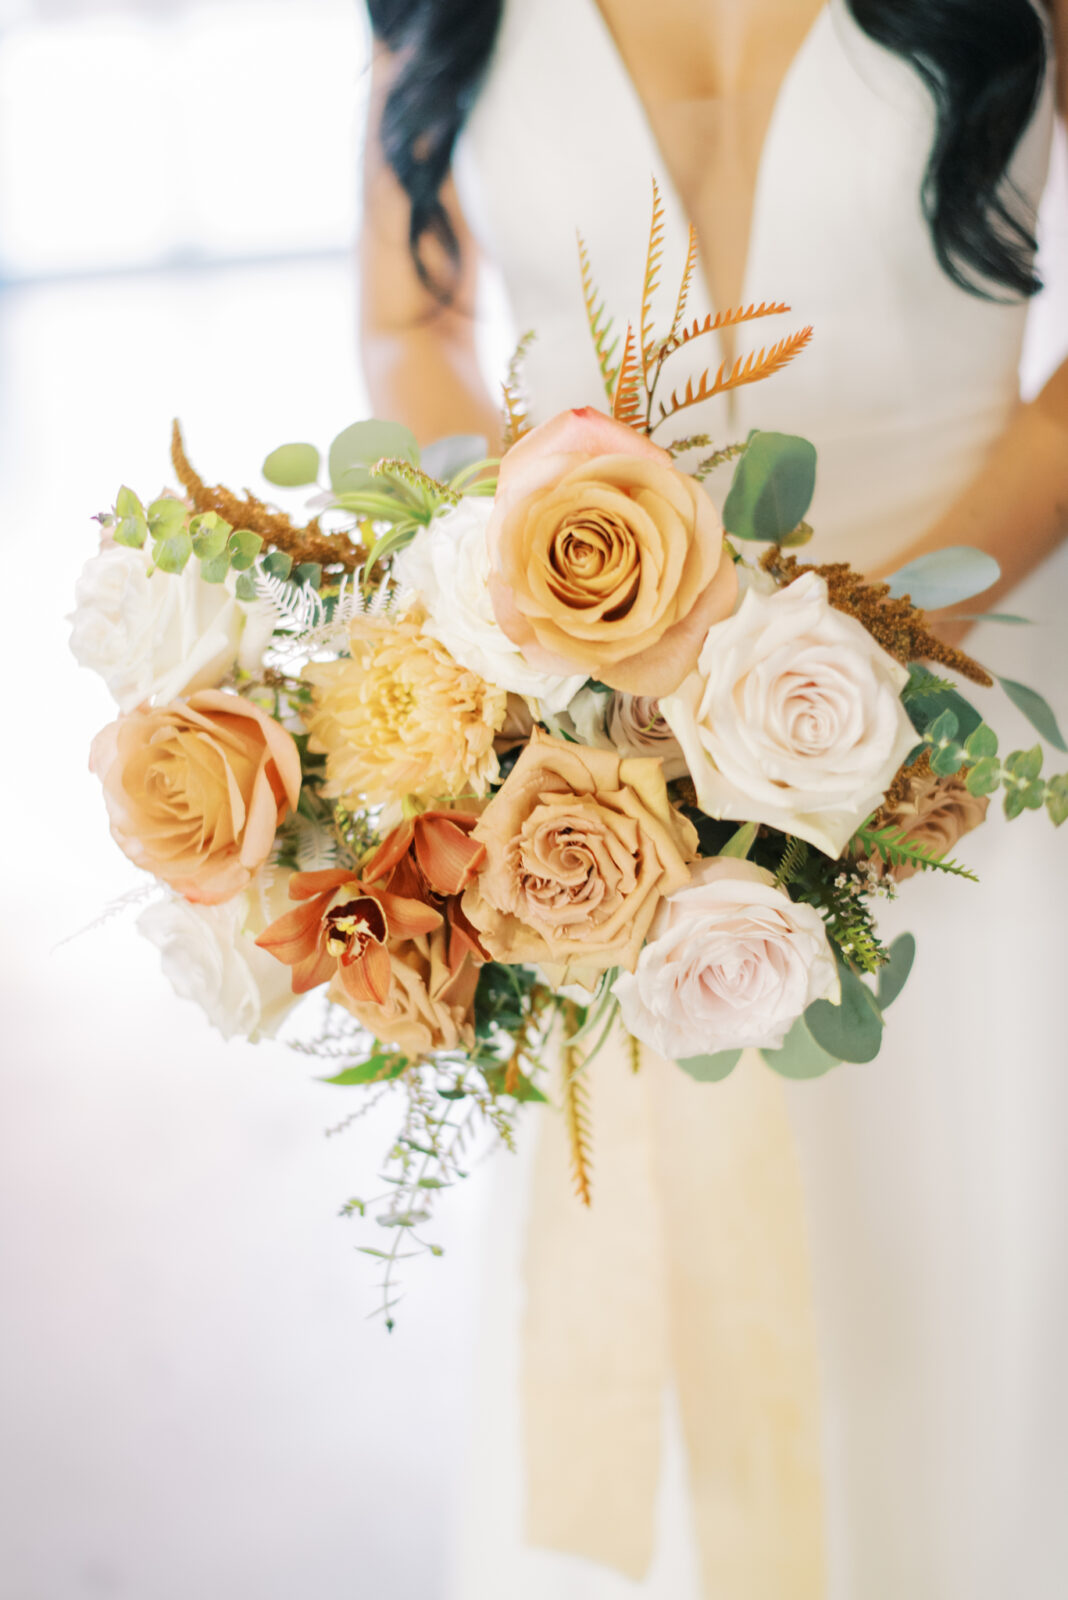 Fall wedding colour scheme with a harmonious blend of autumnal hues for bridal bouquet by Therese Lopez Florals, bride's bouquet details photo